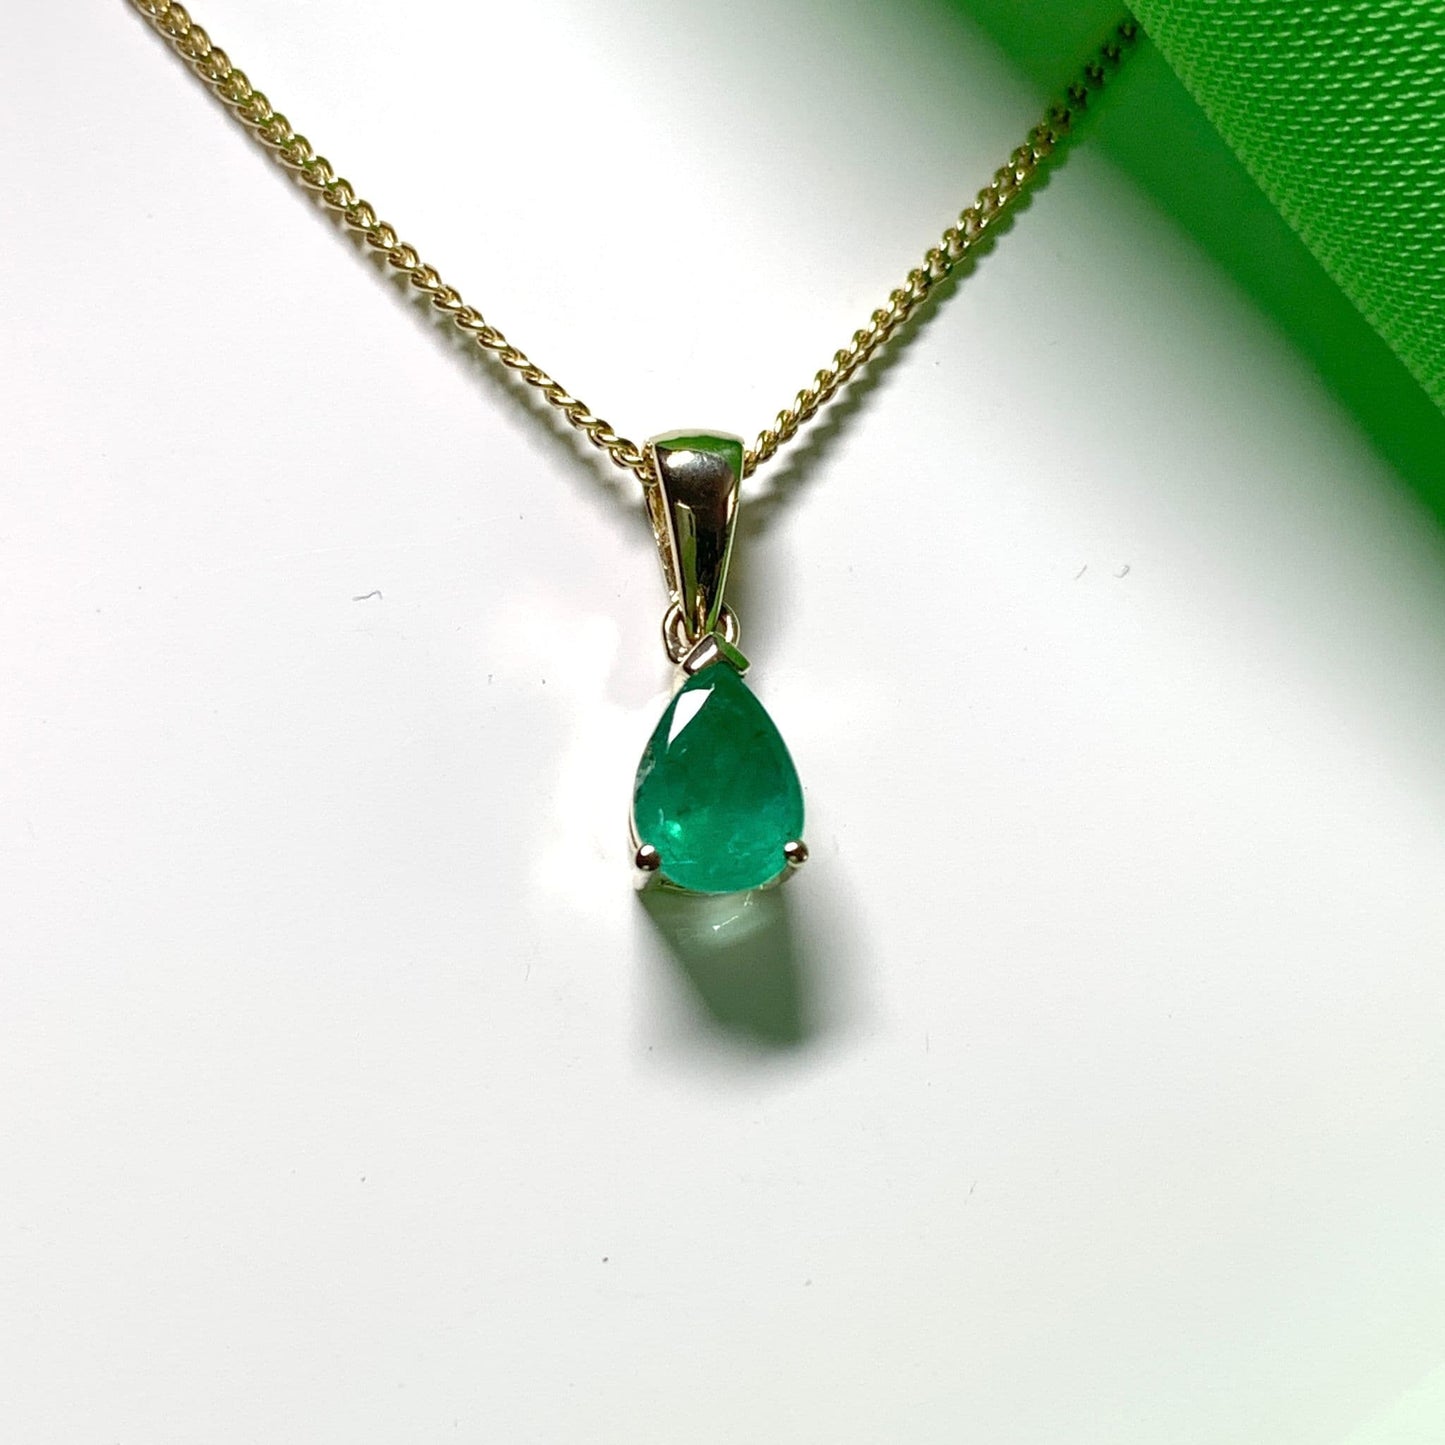 Real green emerald necklace teardrop gold pendant